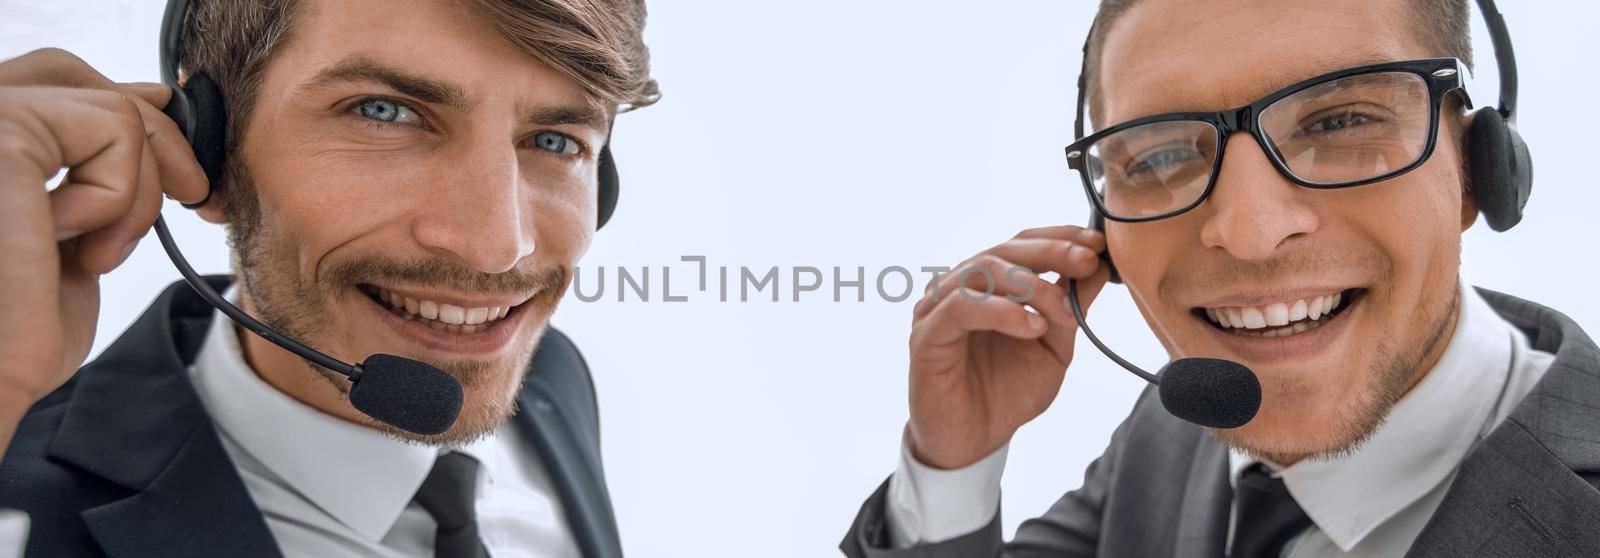 Smiling businessman talking on headset against a white backgroun by asdf